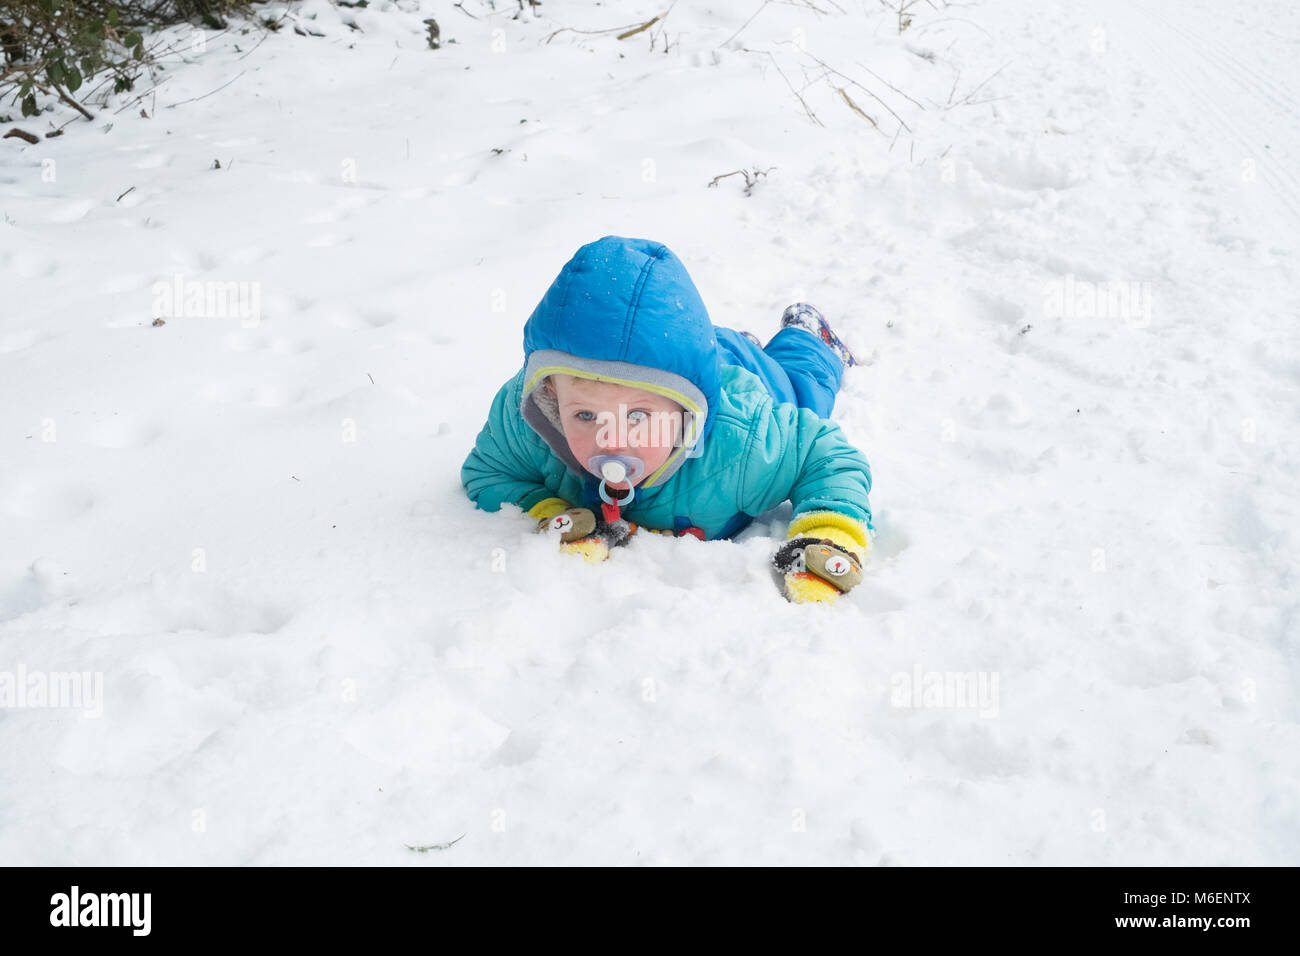 Eighteen month old baby boy in the snow, Medstead, Alton, Hampshire, England, United Kingdom. Stock Photo